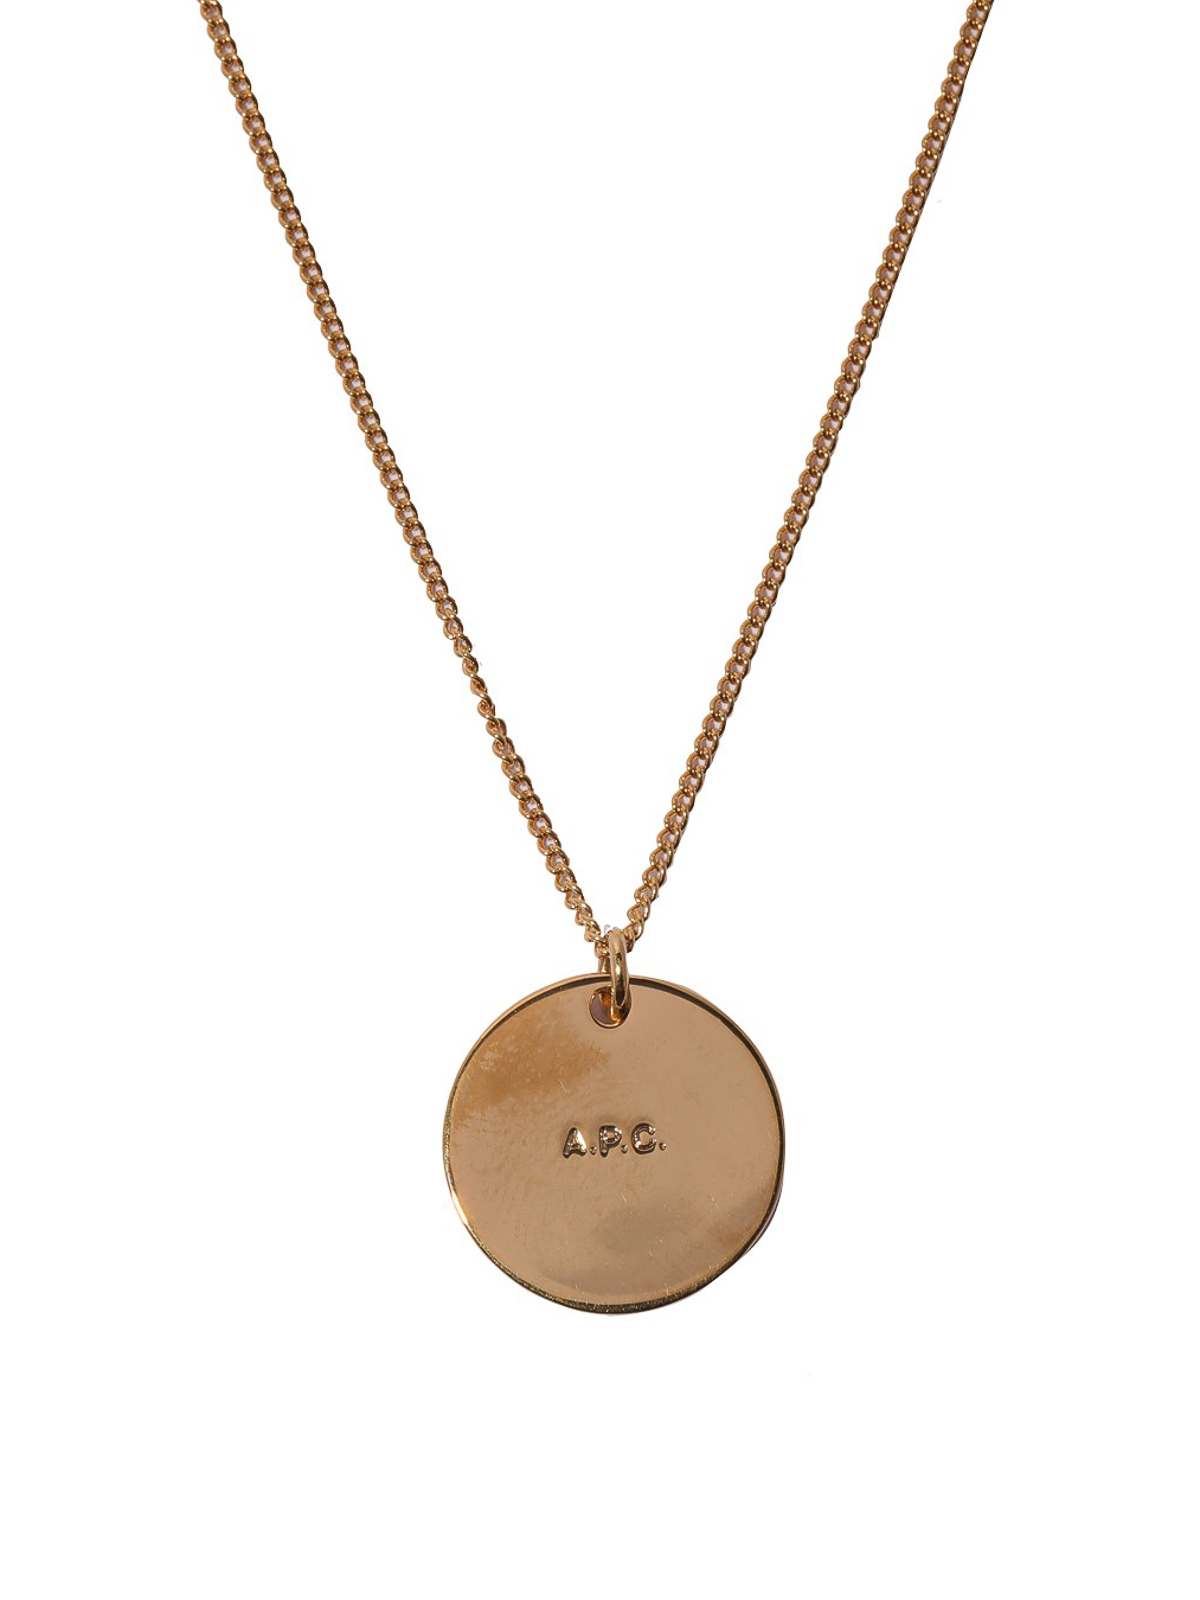 Necklaces & Chokers A.P.C. - Necklace in gold tone with charm and